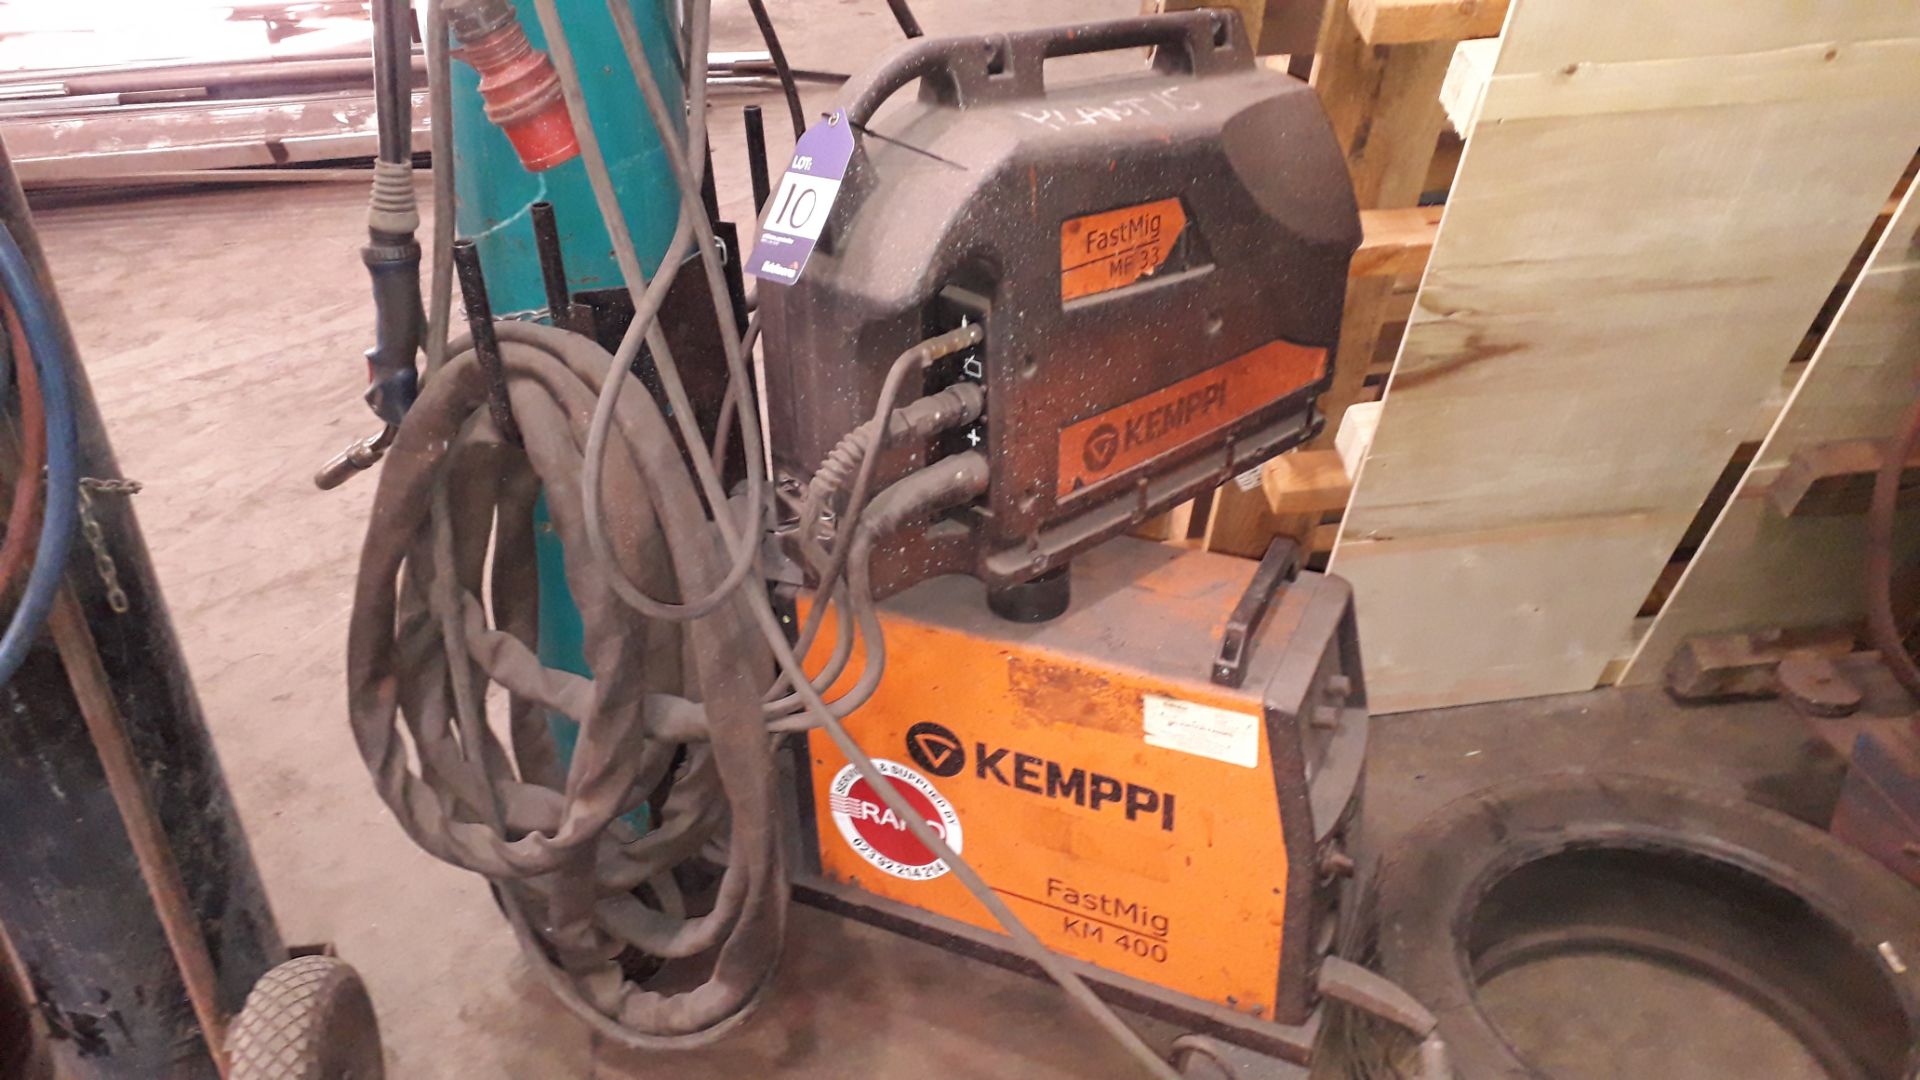 Kempi Fast Mig KM400 Mig Welding Set with Kempi Mf33 Wire Feed Unit and Trolley (Bottle not